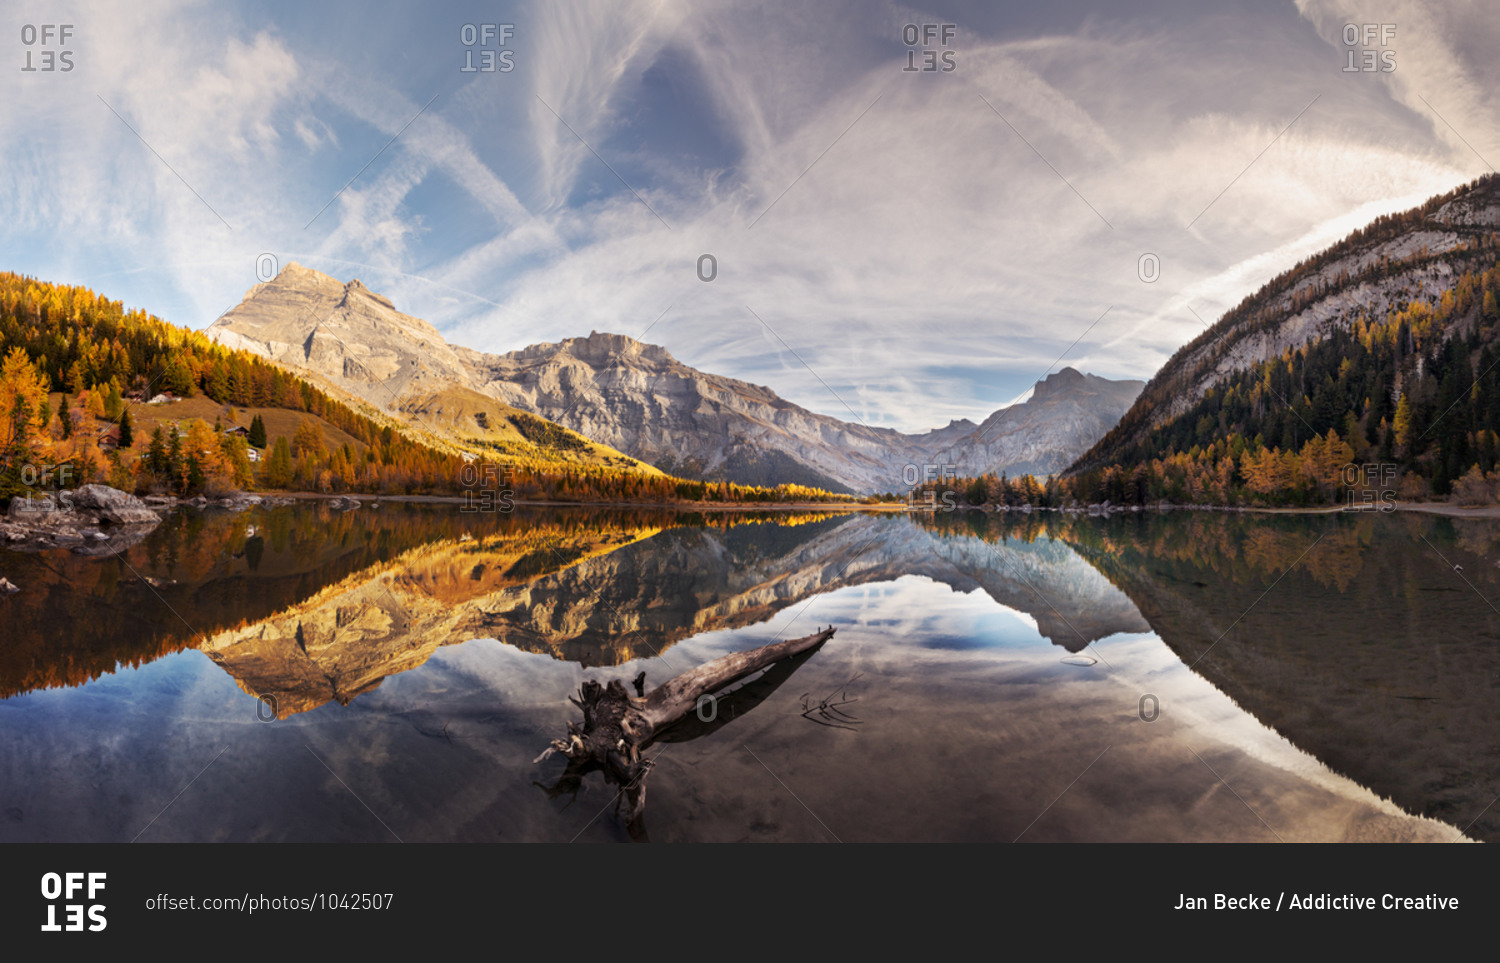 Spectacular scenery of lake with smooth surface reflecting amazing mountain range and sky